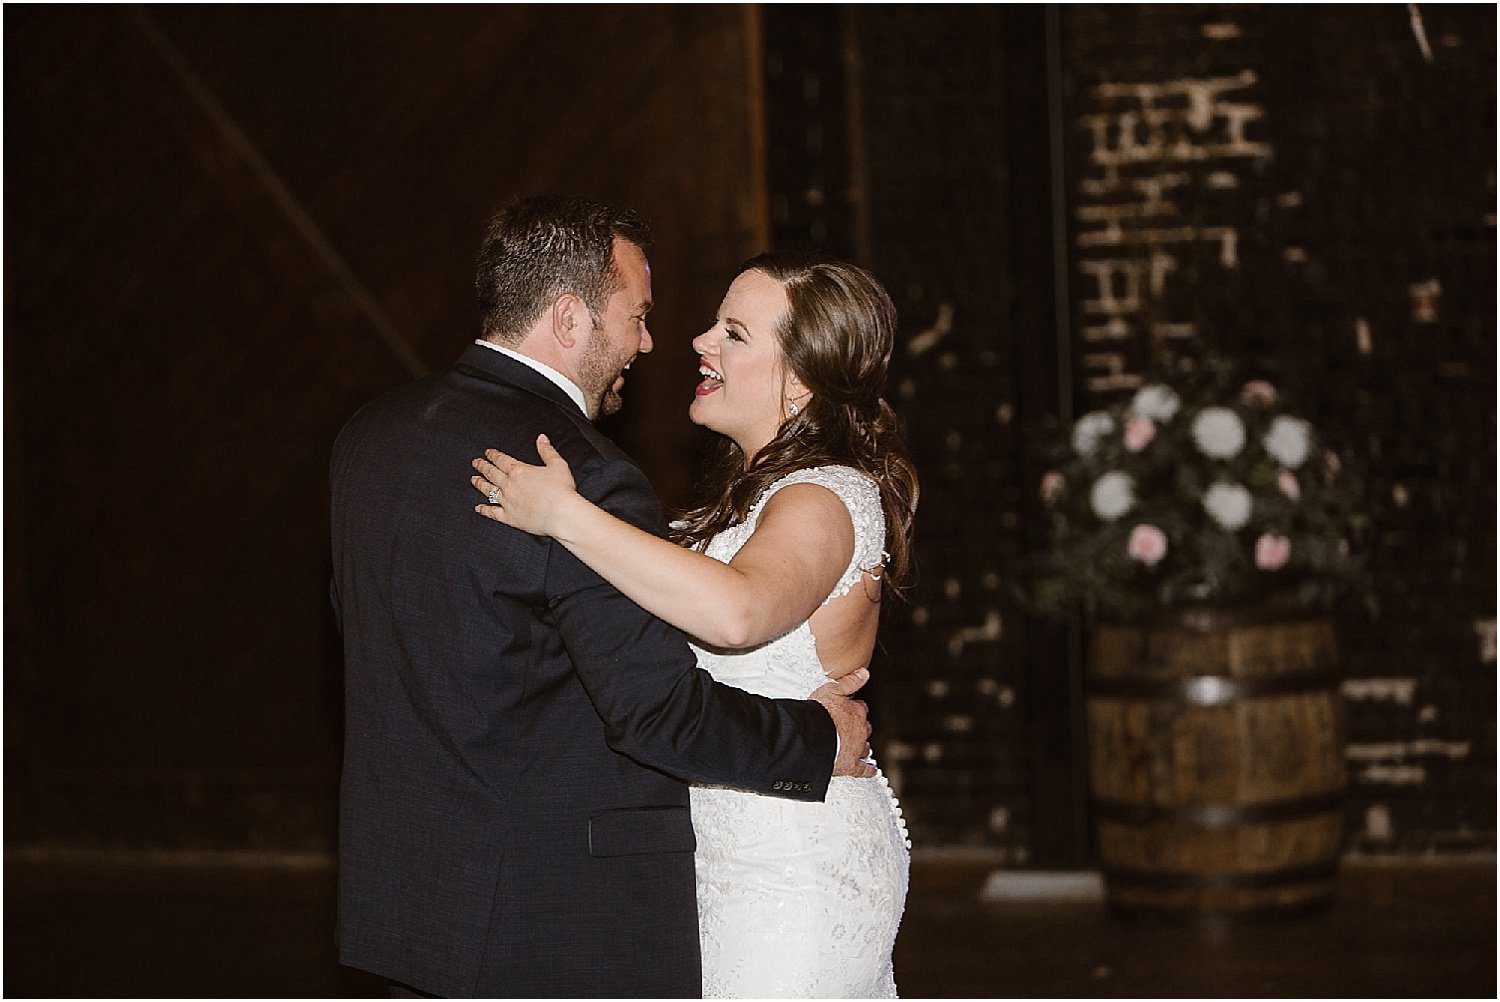 First Dance at Wedding in Downtown Knoxville